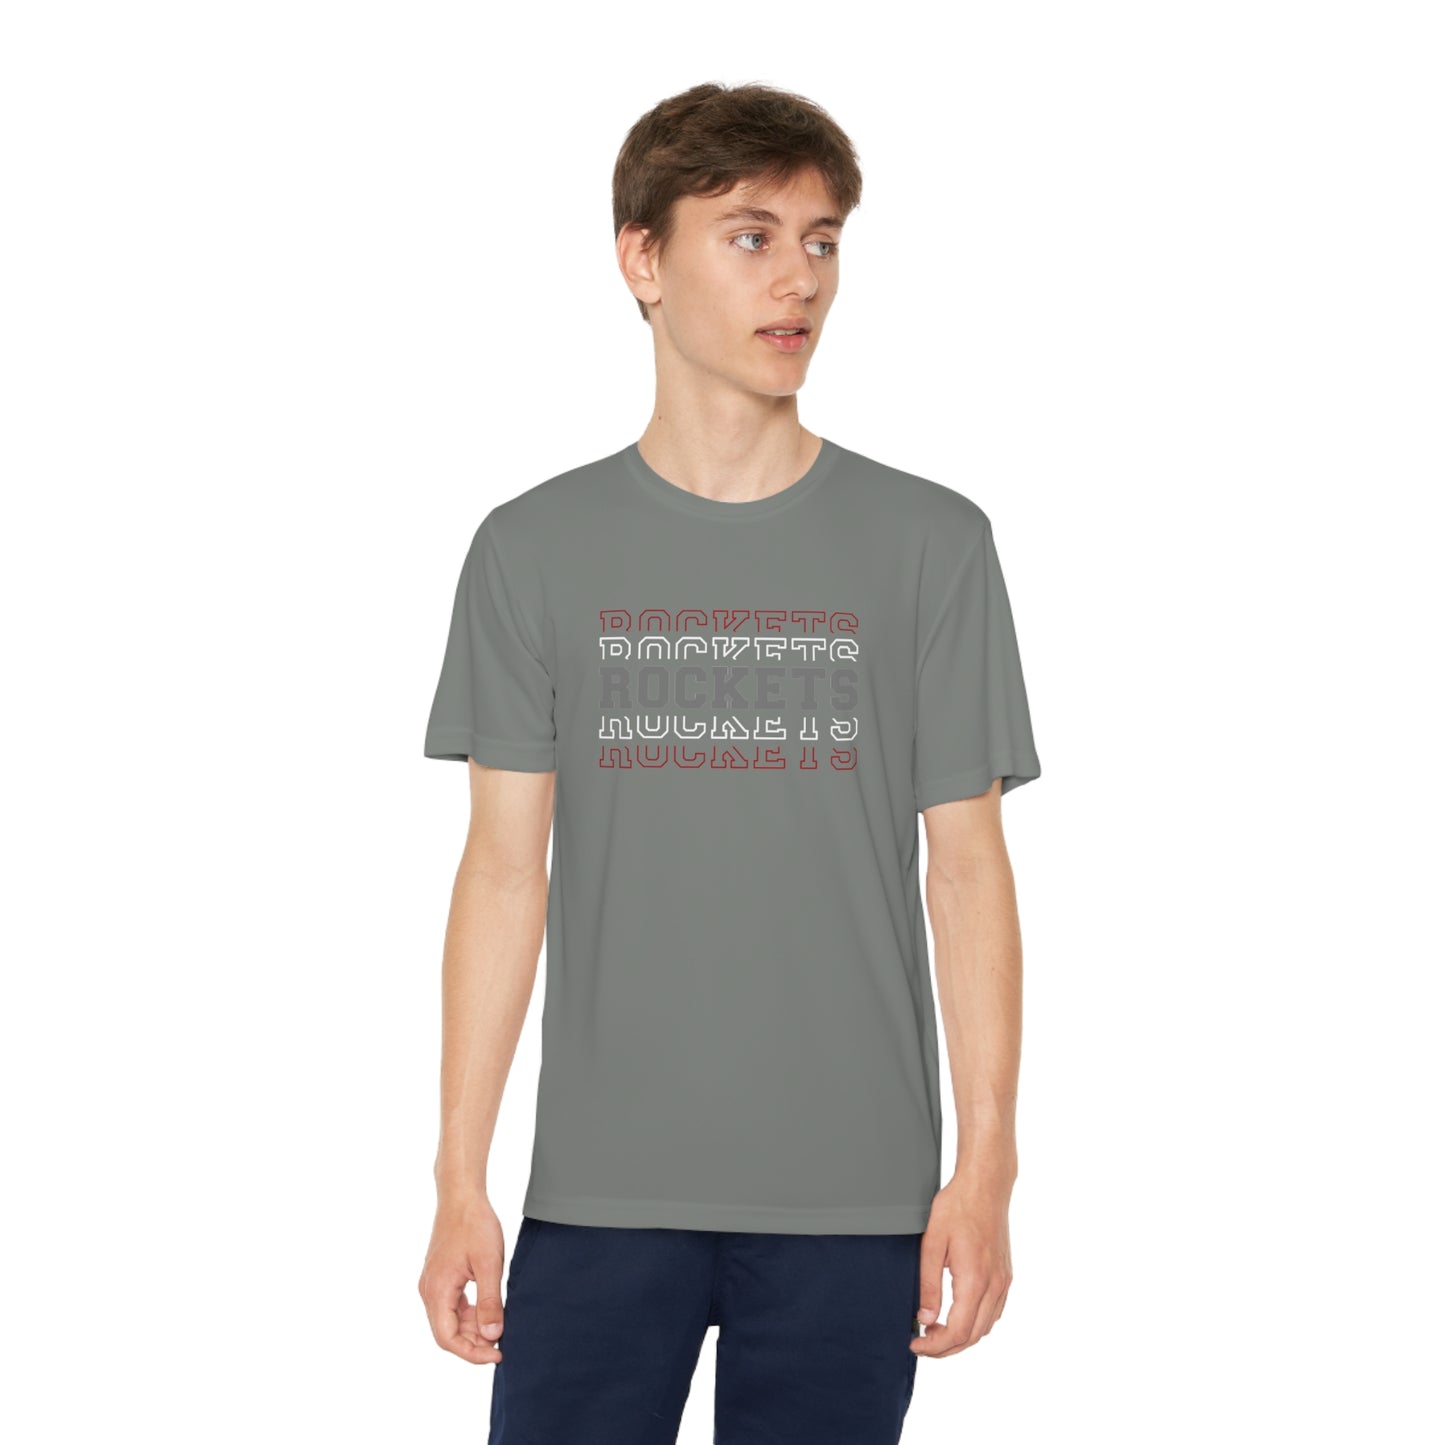 Rockets - Youth Competitor Tee